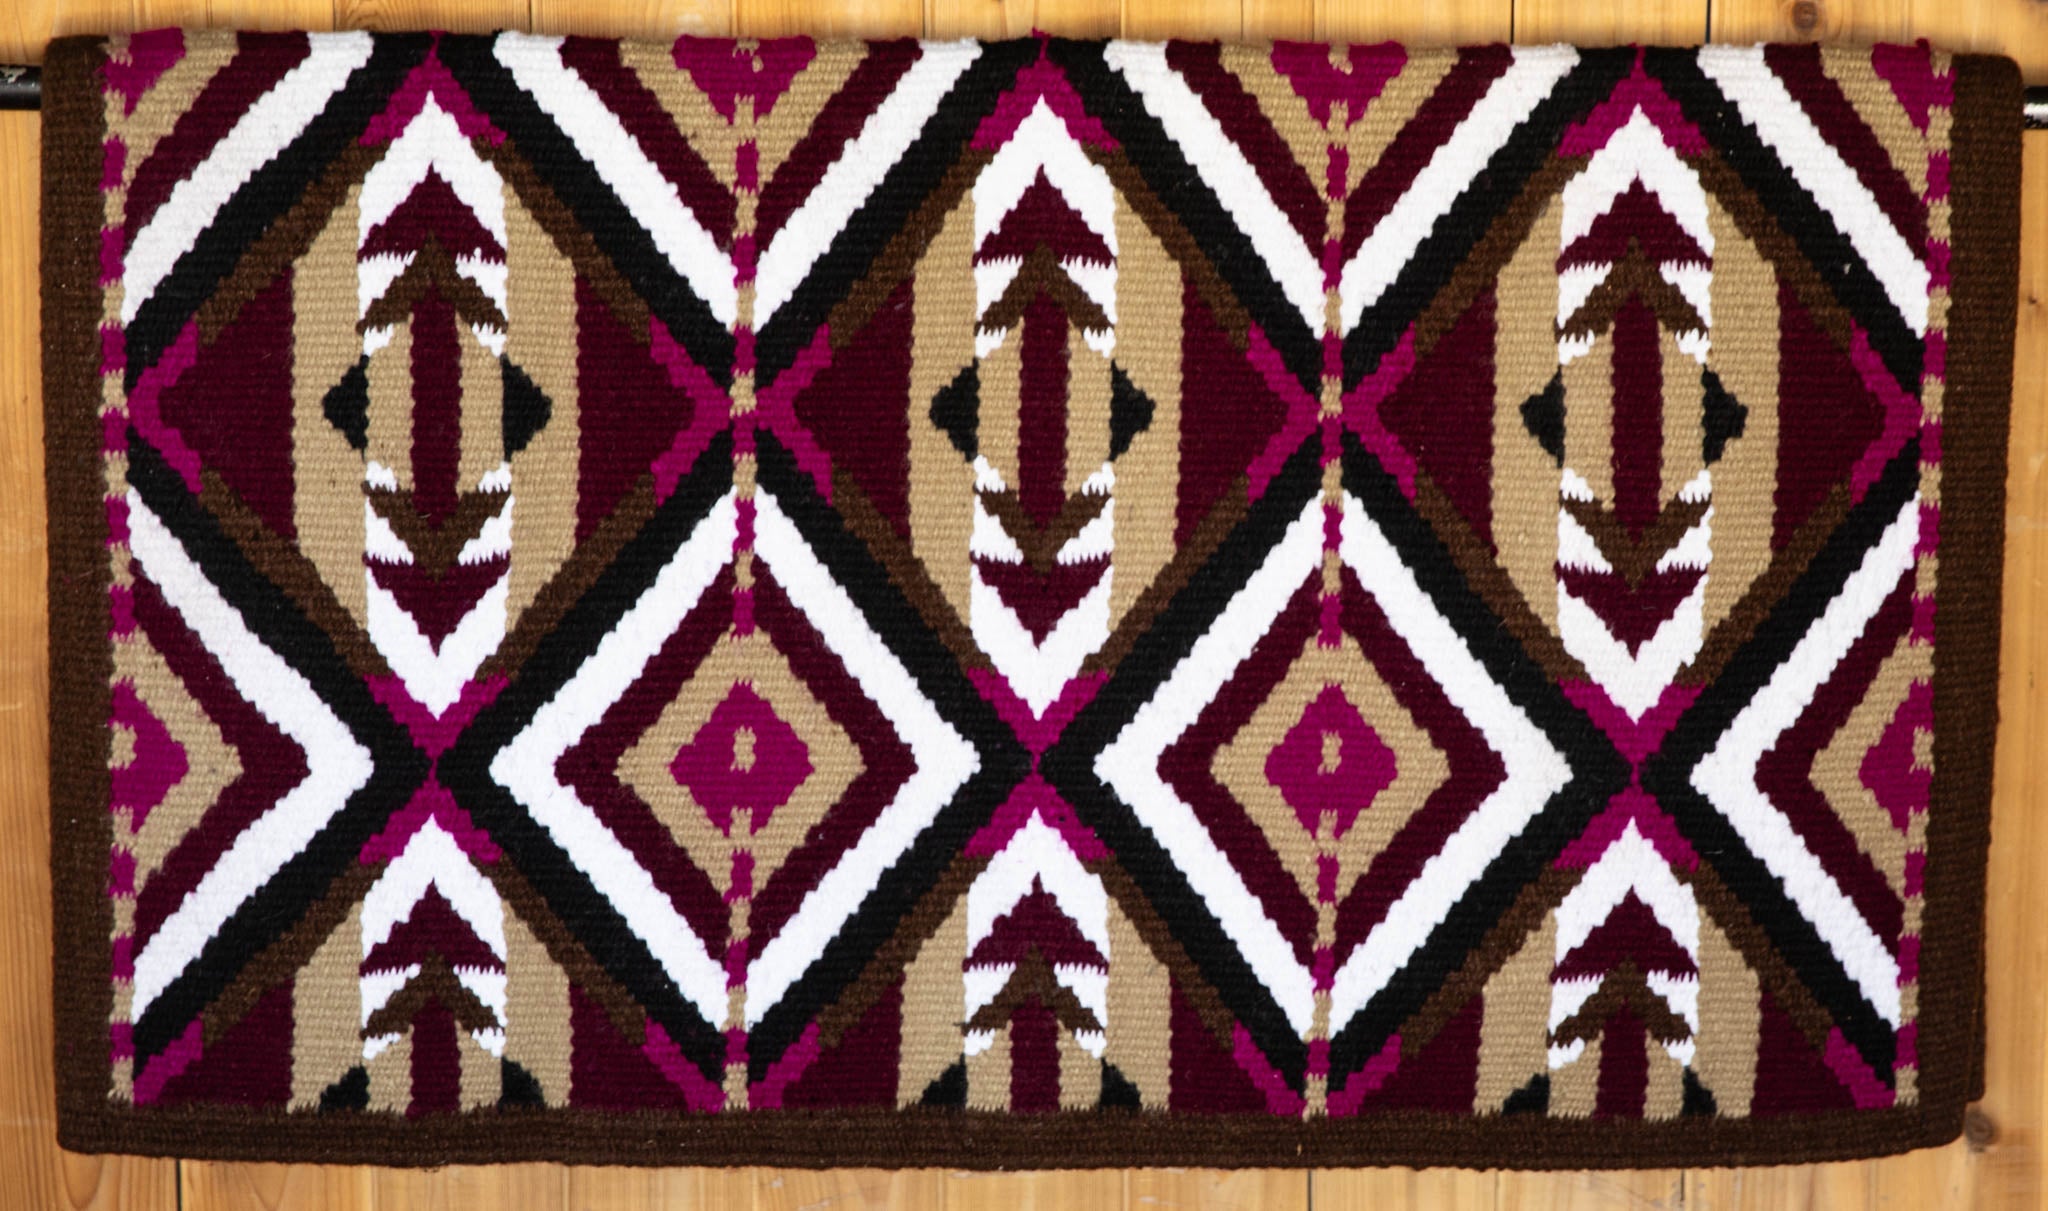 Black, Brown, Wine, Pink, Tan w/ White Accents Flat Show Blanket